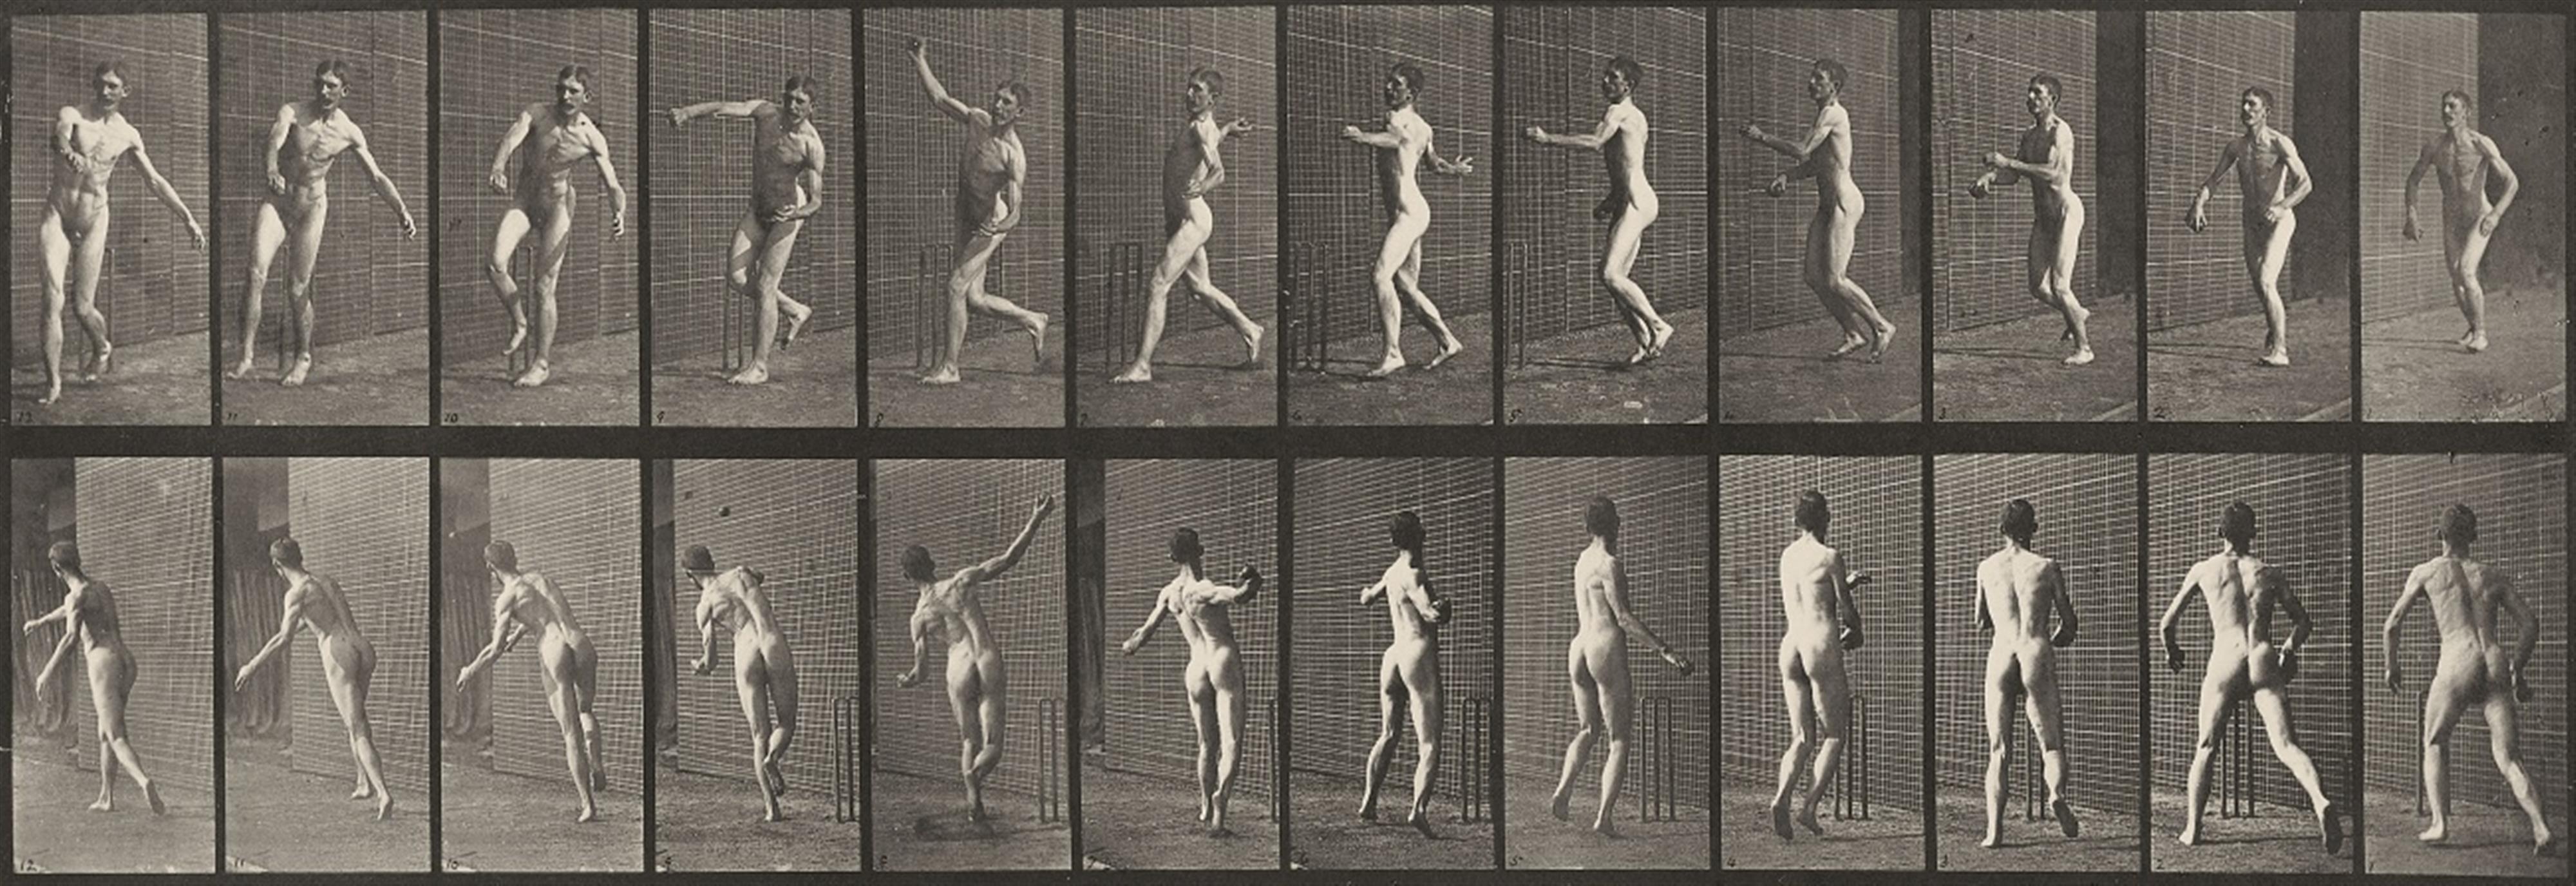 Eadweard Muybridge - Cricket, Overarm Bowling. Man in pelvis cloth throwing rock (pl. 290 and 319, from: Animal Locomotion) - image-1